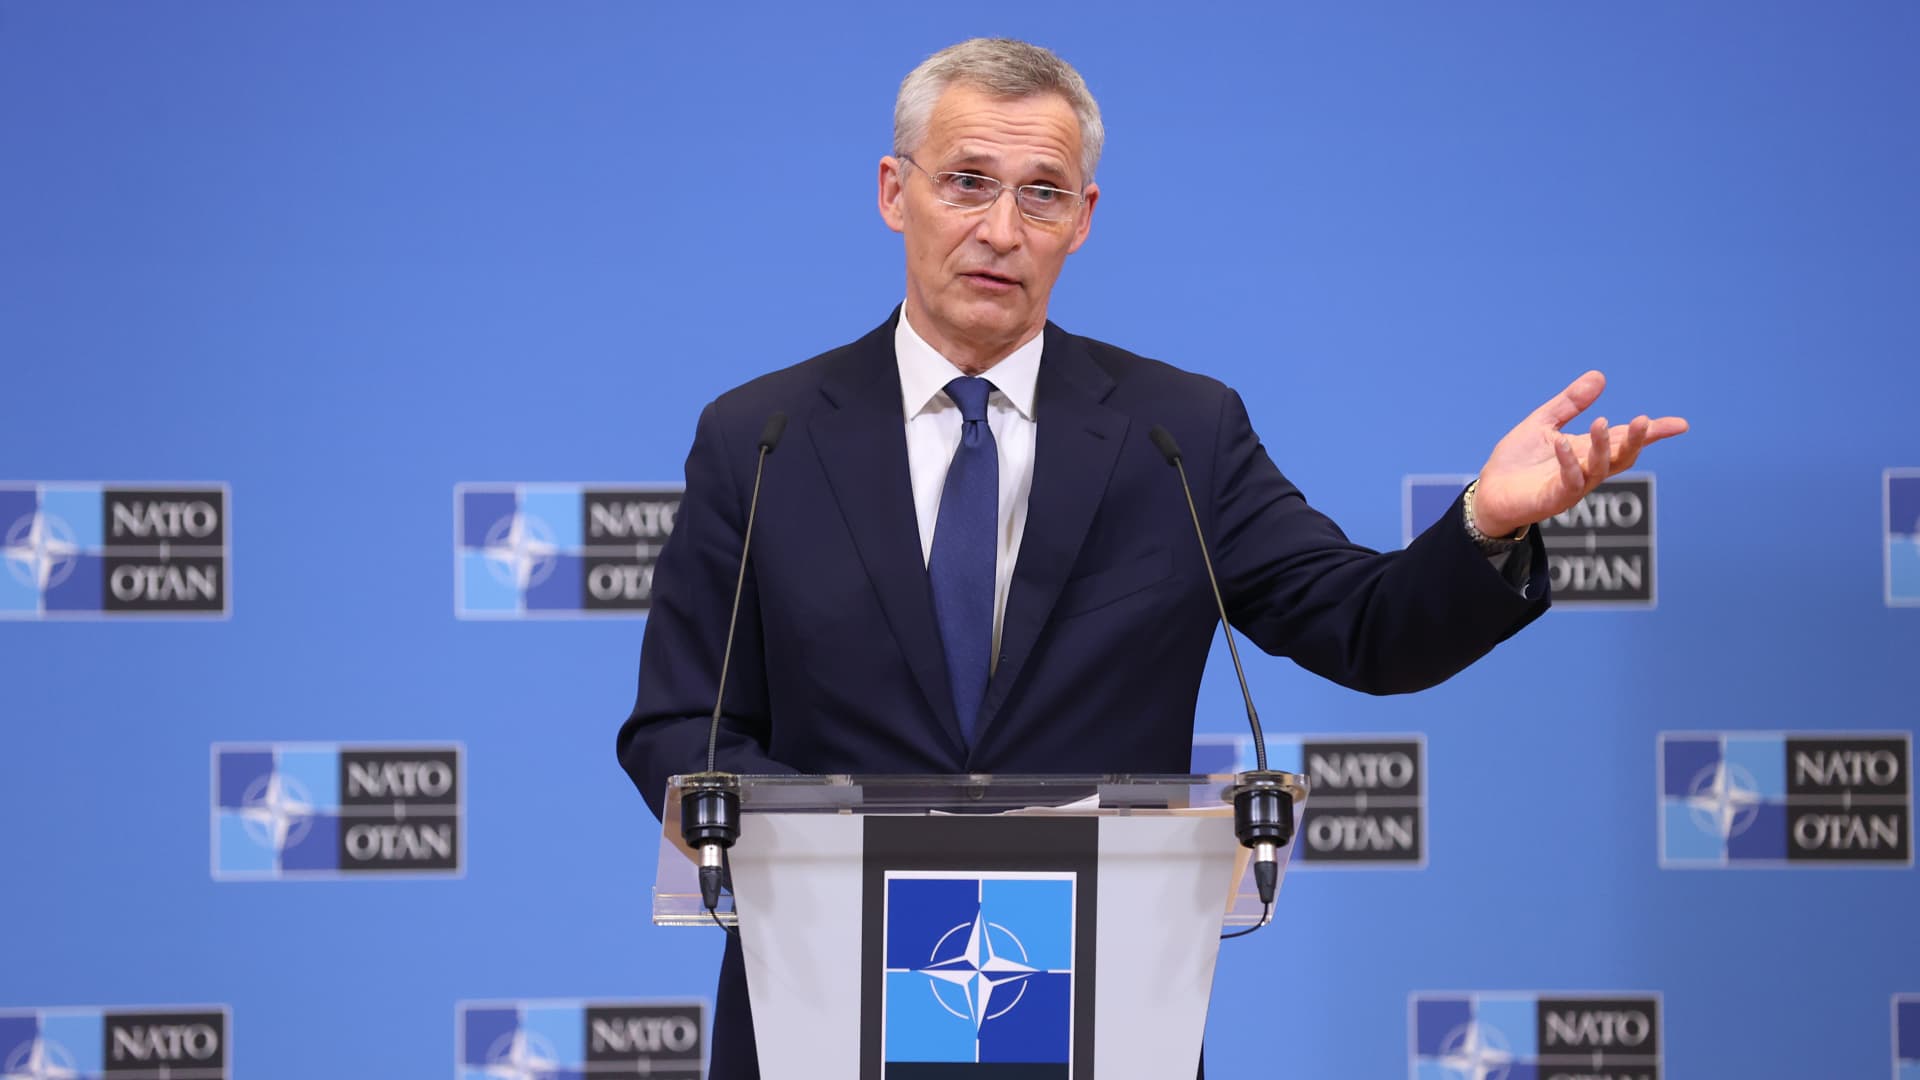 NATO to expand? Chief says Finland  which borders Russia  would be warmly welcomed to the alliance